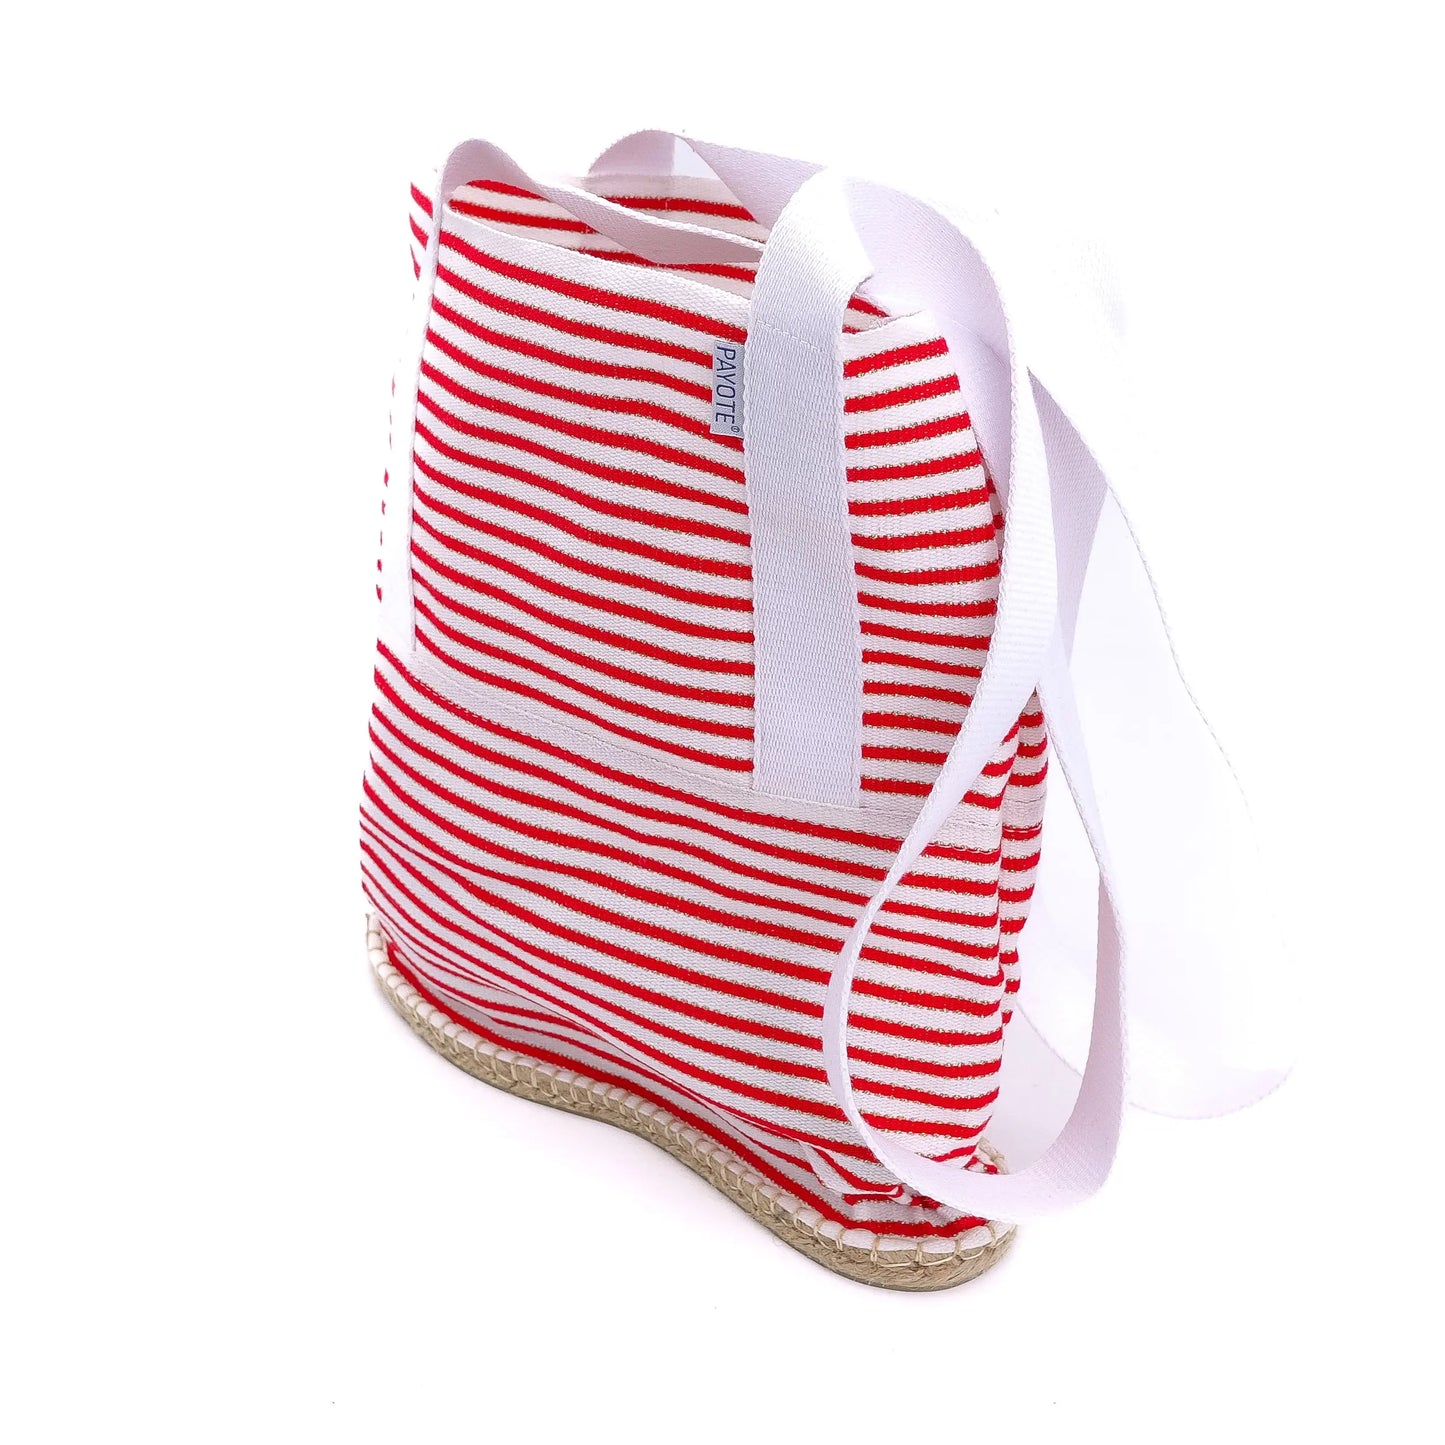 Sac espadrille blanc rayé rouge made in France